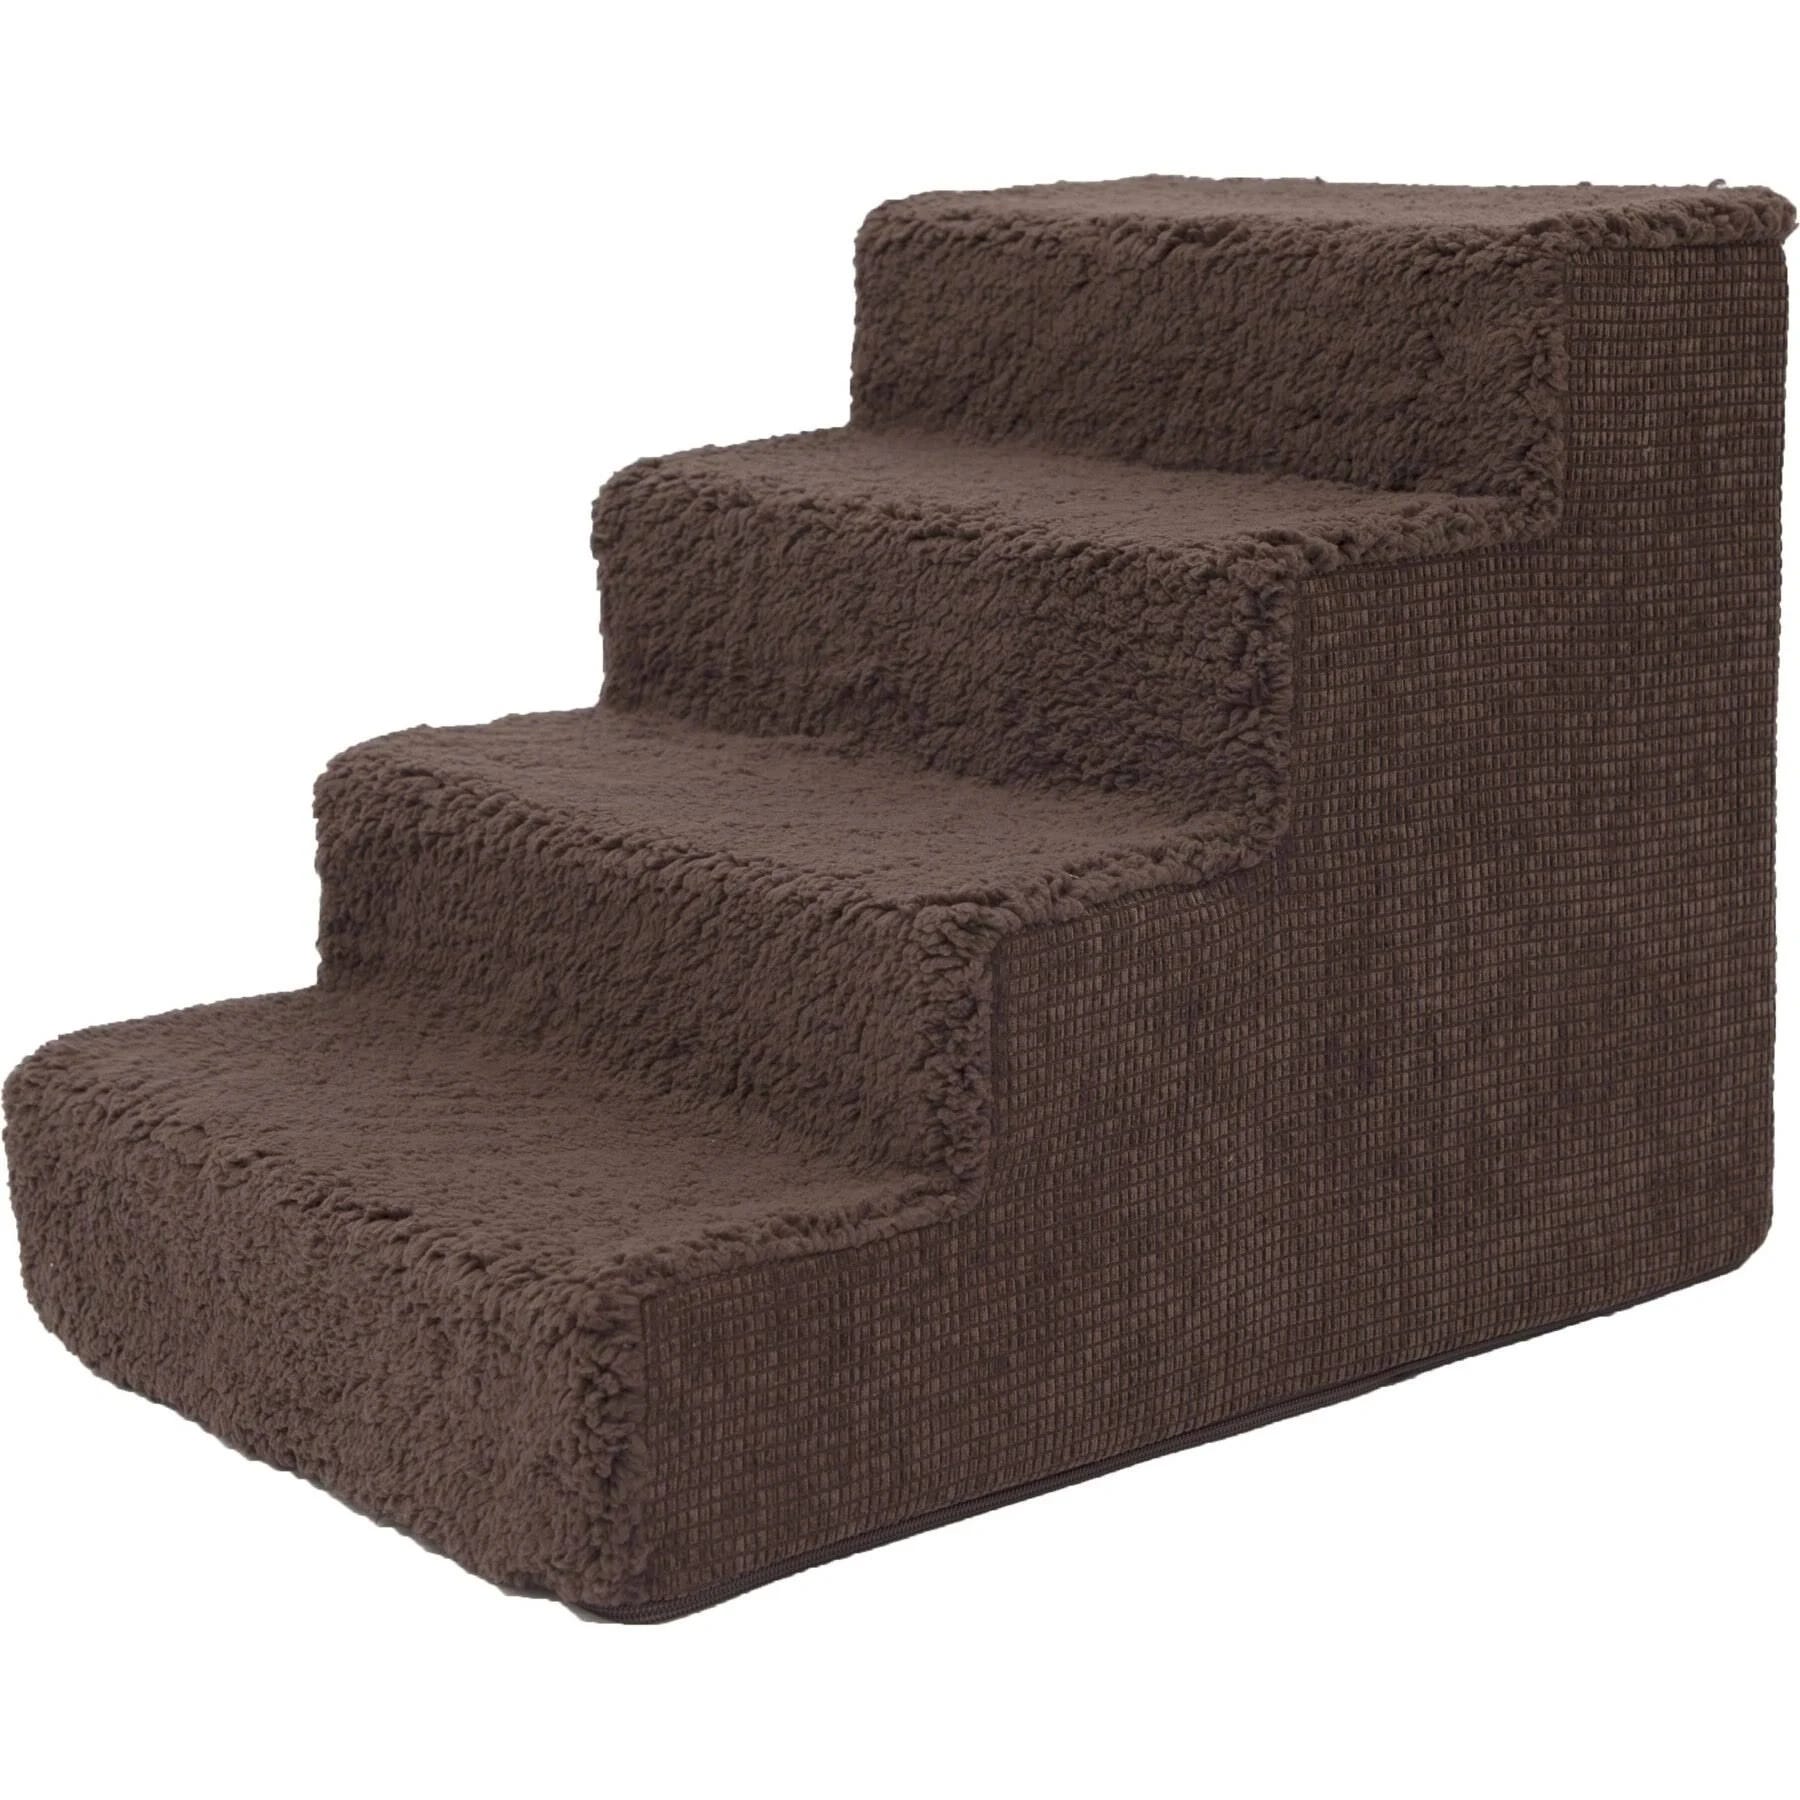 Precious Tails High Density Sherpa 4-Step Pet Stairs - Brown | Image